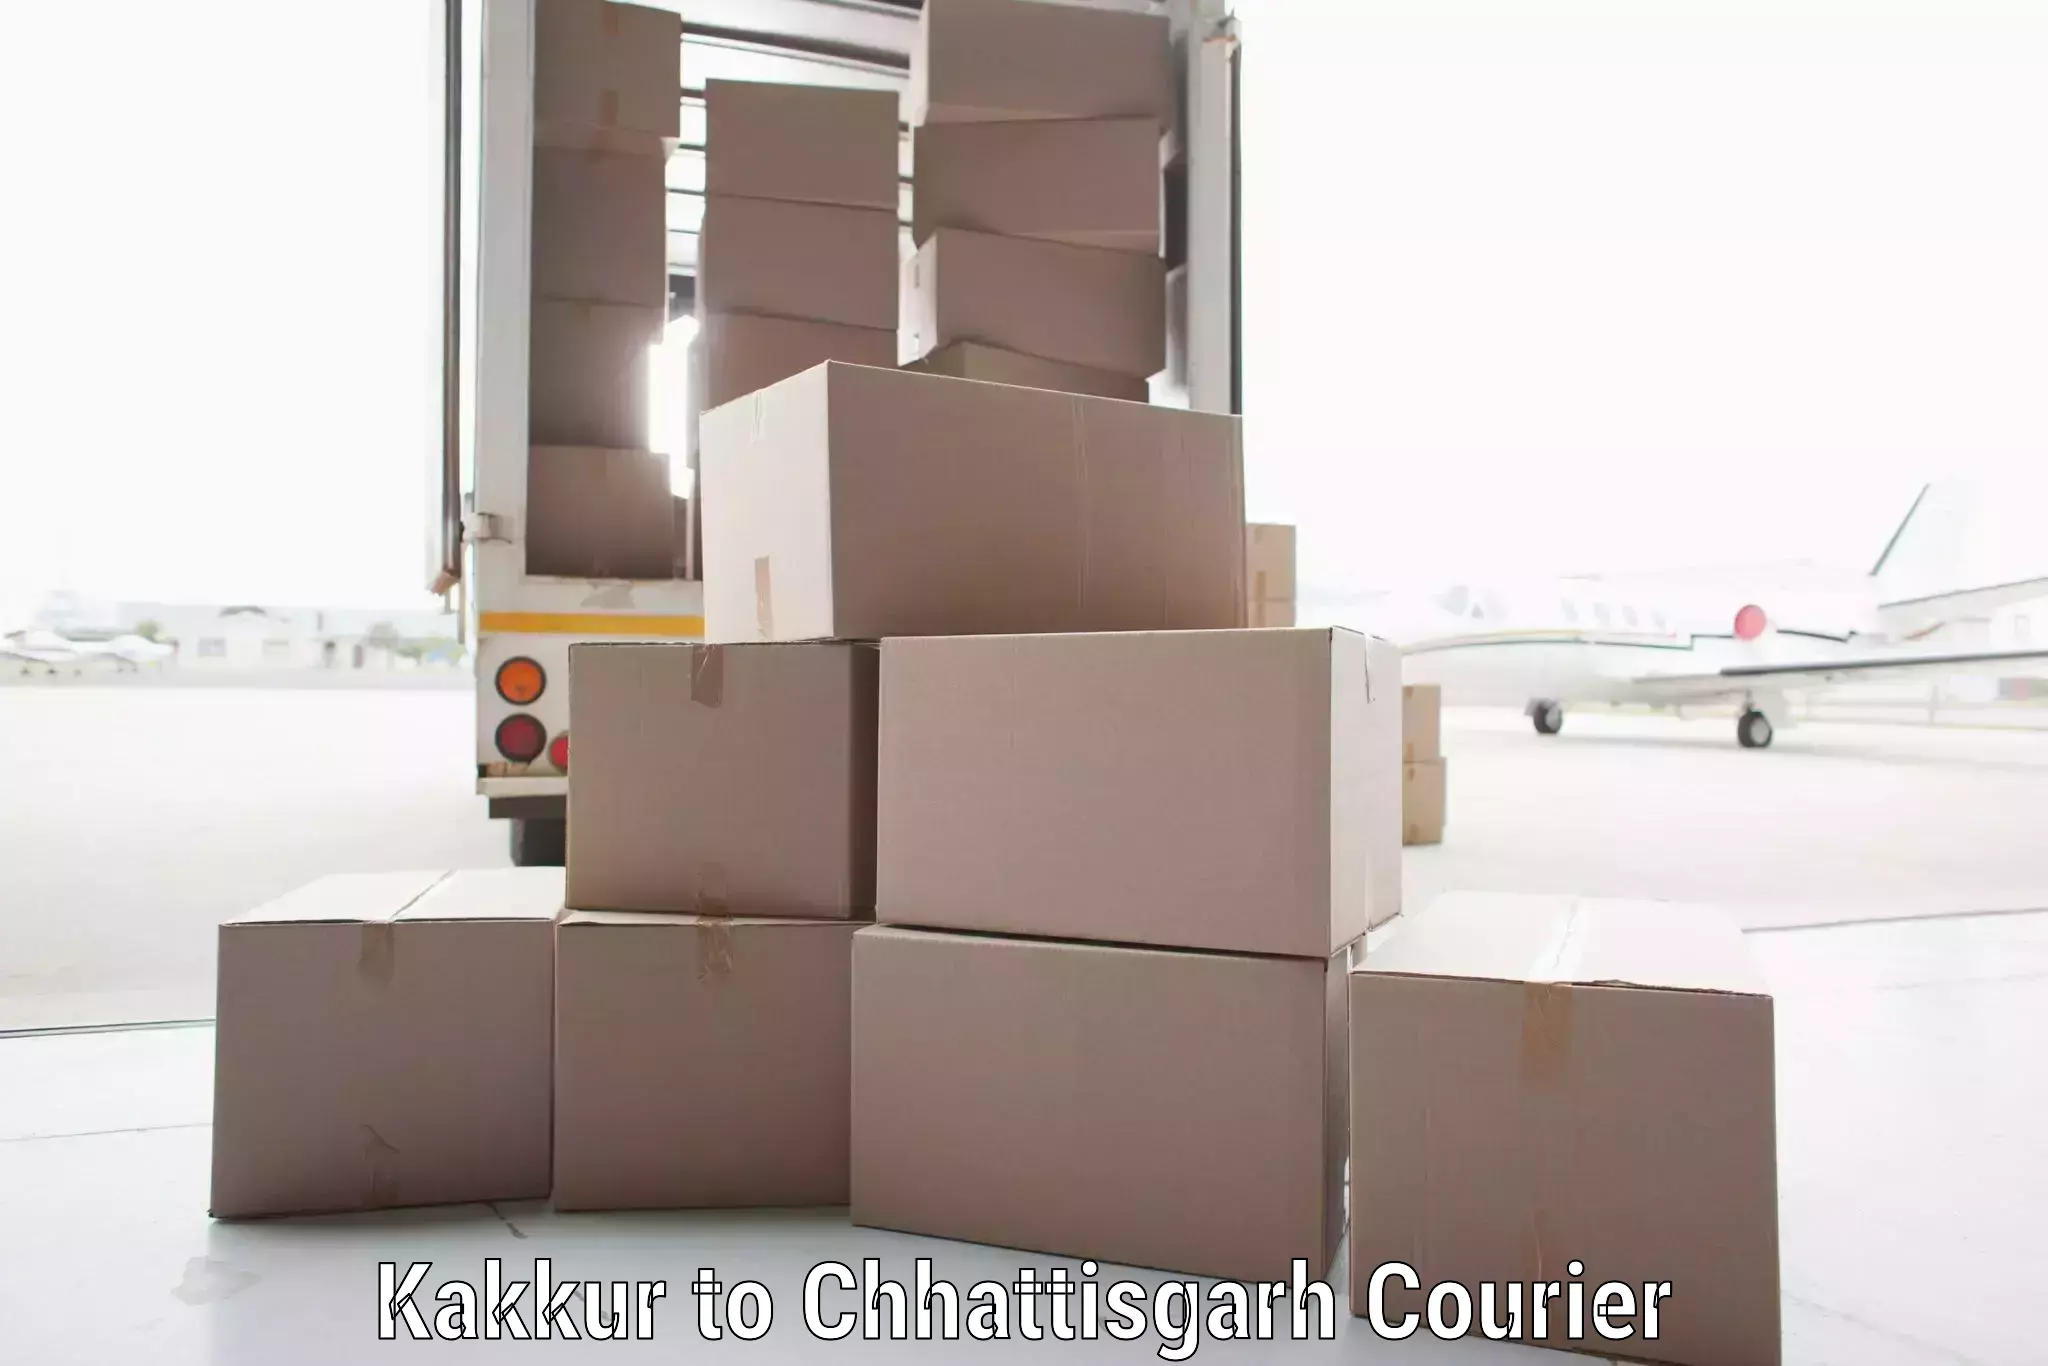 Easy access courier services in Kakkur to bagbahra